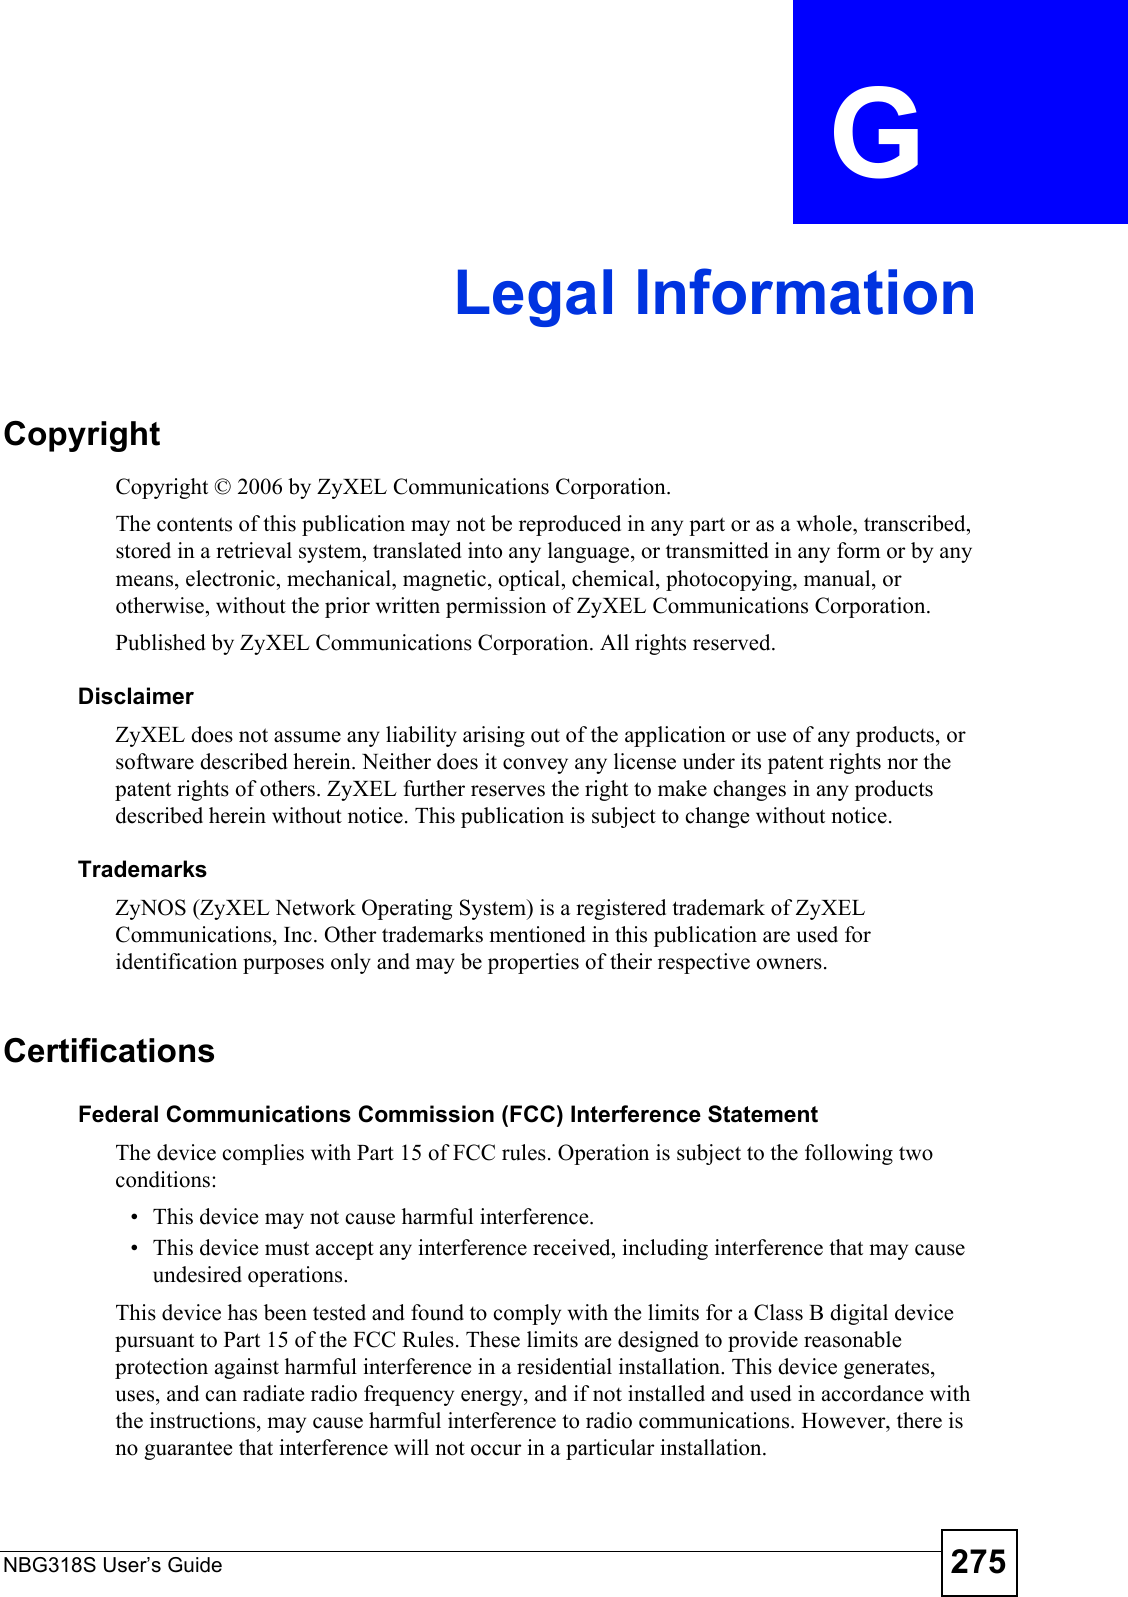 NBG318S User’s Guide 275APPENDIX  G Legal InformationCopyrightCopyright © 2006 by ZyXEL Communications Corporation.The contents of this publication may not be reproduced in any part or as a whole, transcribed, stored in a retrieval system, translated into any language, or transmitted in any form or by any means, electronic, mechanical, magnetic, optical, chemical, photocopying, manual, or otherwise, without the prior written permission of ZyXEL Communications Corporation.Published by ZyXEL Communications Corporation. All rights reserved.DisclaimerZyXEL does not assume any liability arising out of the application or use of any products, or software described herein. Neither does it convey any license under its patent rights nor the patent rights of others. ZyXEL further reserves the right to make changes in any products described herein without notice. This publication is subject to change without notice.TrademarksZyNOS (ZyXEL Network Operating System) is a registered trademark of ZyXEL Communications, Inc. Other trademarks mentioned in this publication are used for identification purposes only and may be properties of their respective owners.Certifications Federal Communications Commission (FCC) Interference StatementThe device complies with Part 15 of FCC rules. Operation is subject to the following two conditions:• This device may not cause harmful interference.• This device must accept any interference received, including interference that may cause undesired operations.This device has been tested and found to comply with the limits for a Class B digital device pursuant to Part 15 of the FCC Rules. These limits are designed to provide reasonable protection against harmful interference in a residential installation. This device generates, uses, and can radiate radio frequency energy, and if not installed and used in accordance with the instructions, may cause harmful interference to radio communications. However, there is no guarantee that interference will not occur in a particular installation.